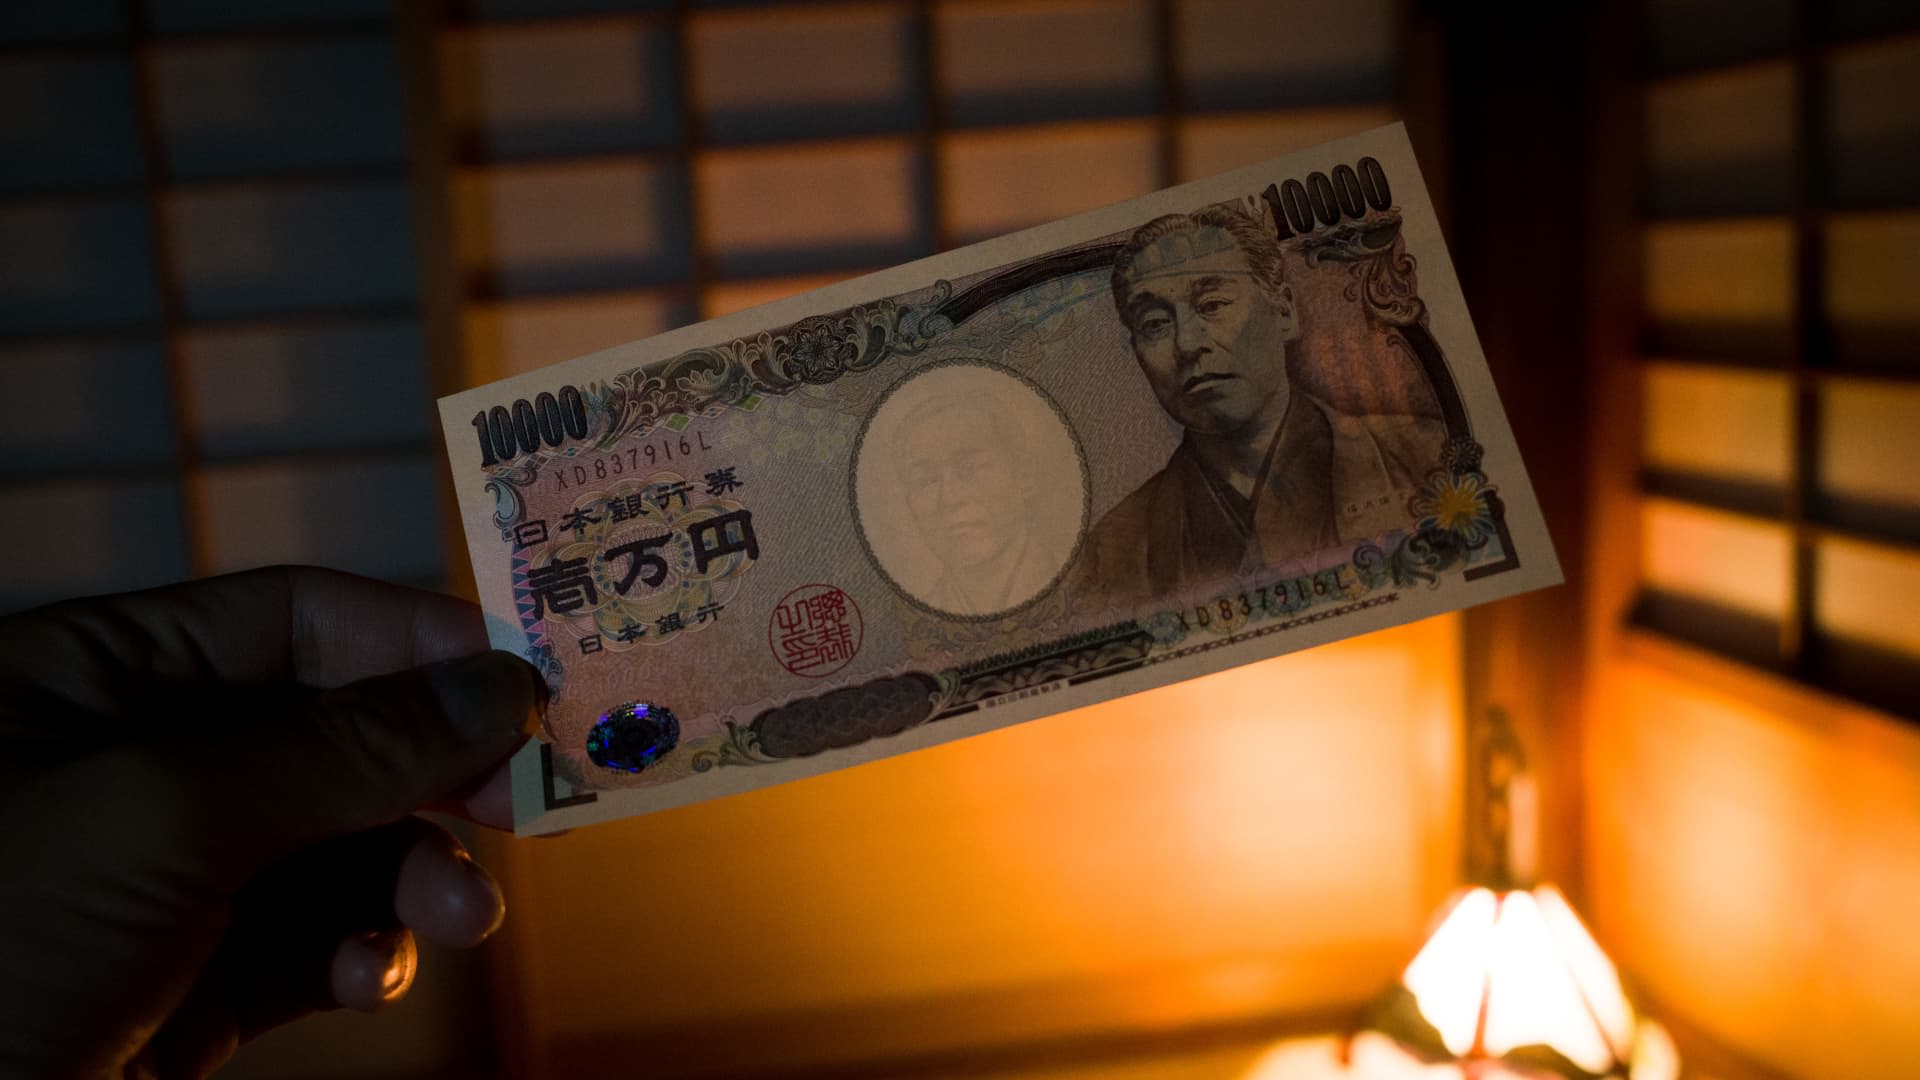 Japan is not seeking a strong yen but a stable currency, David Roche says